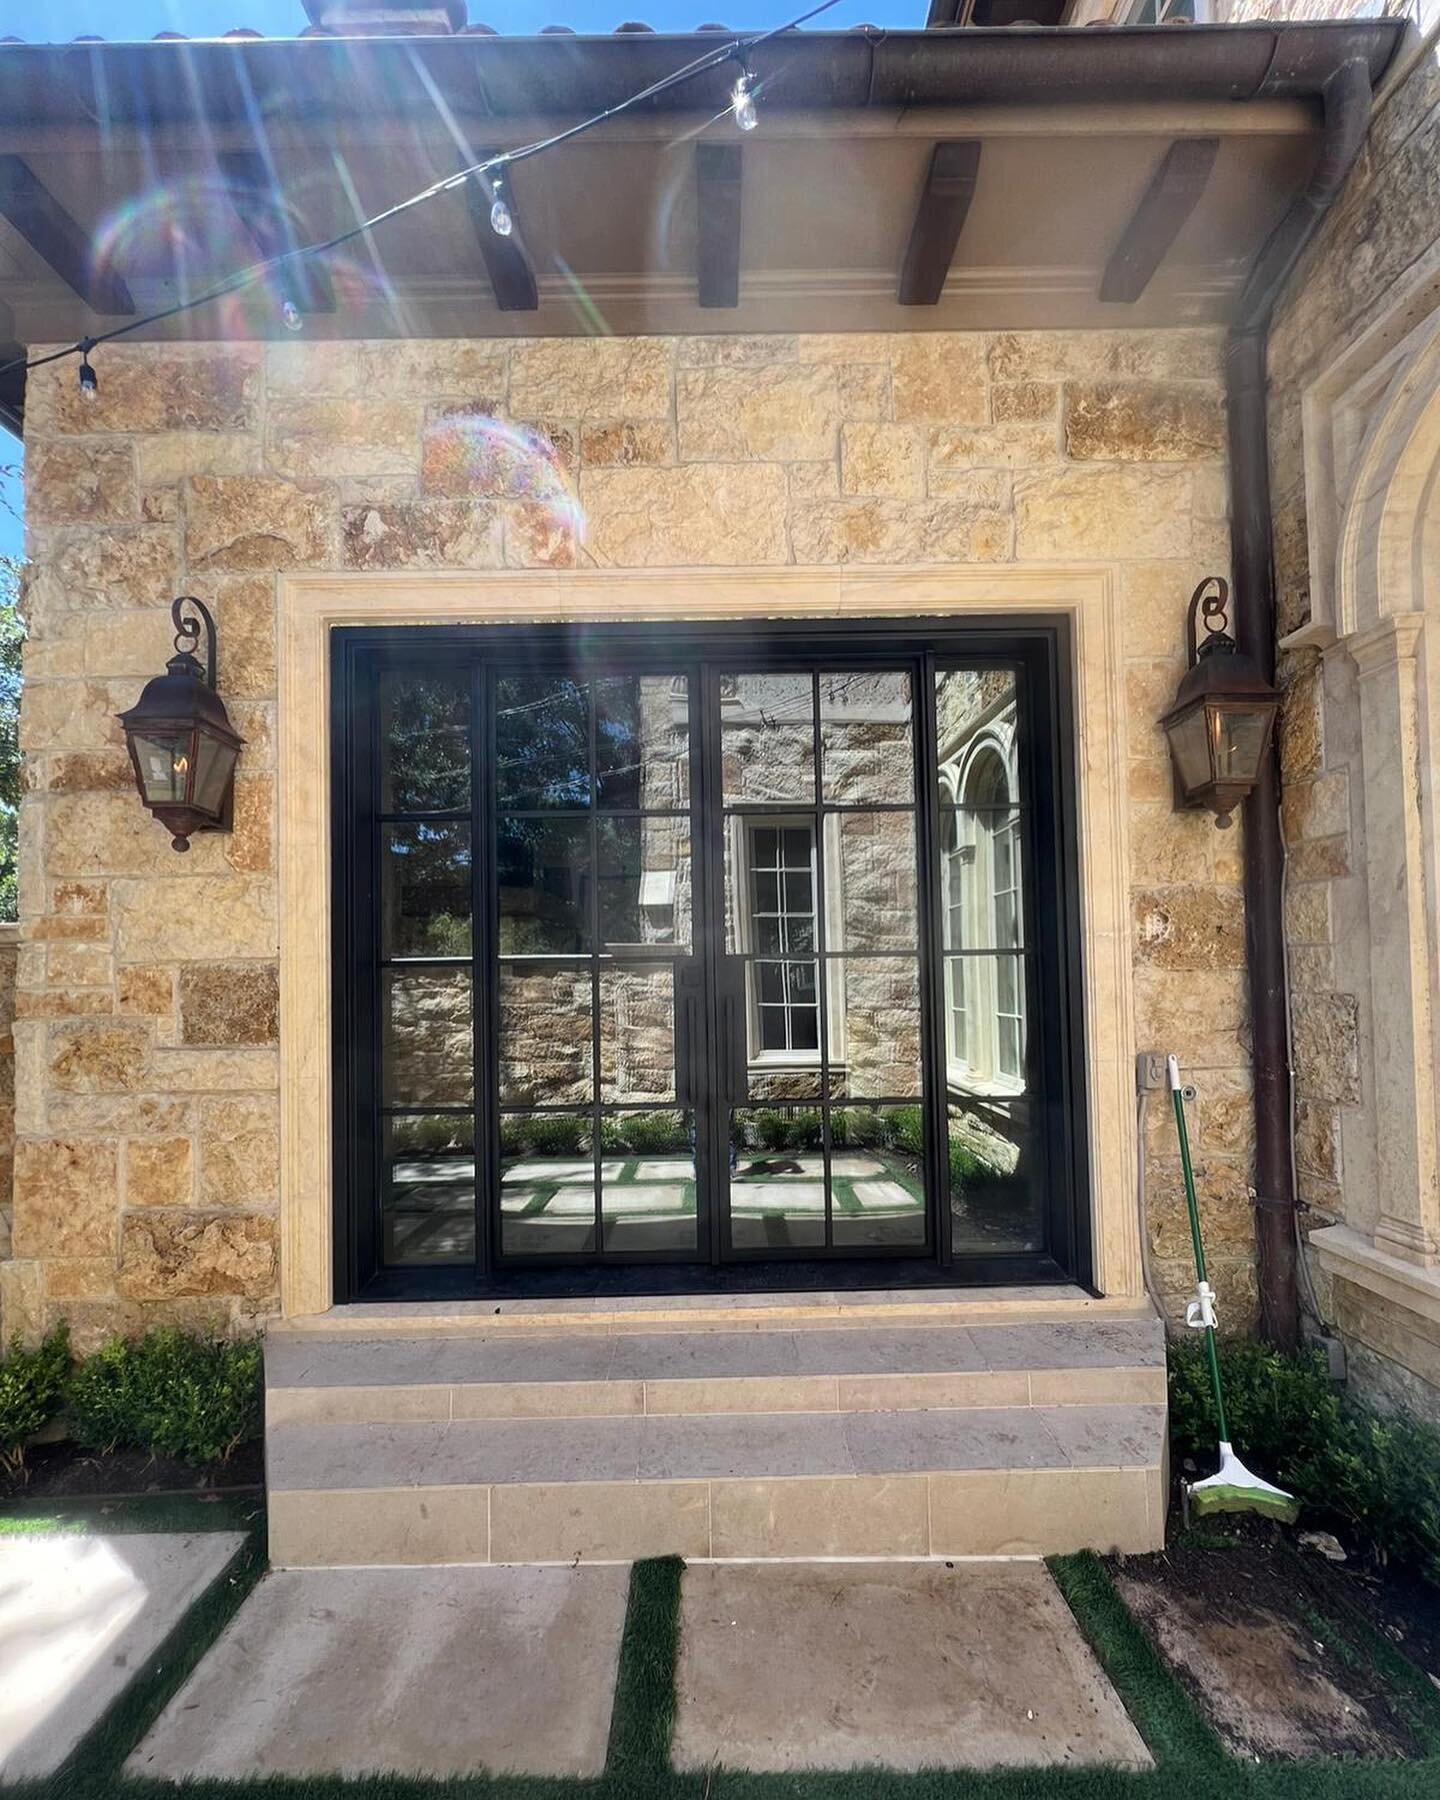 SWIPE to see BEFORE picture ⏩⏩⏩ and also swipe to see our perfectly aligned door 🤓 we can confidently say that our in-house installers are the best in town 👏🏽👏🏽

More pictures of this remodel to come ✨

#steeldoors #homebuilder #irondoors #moder